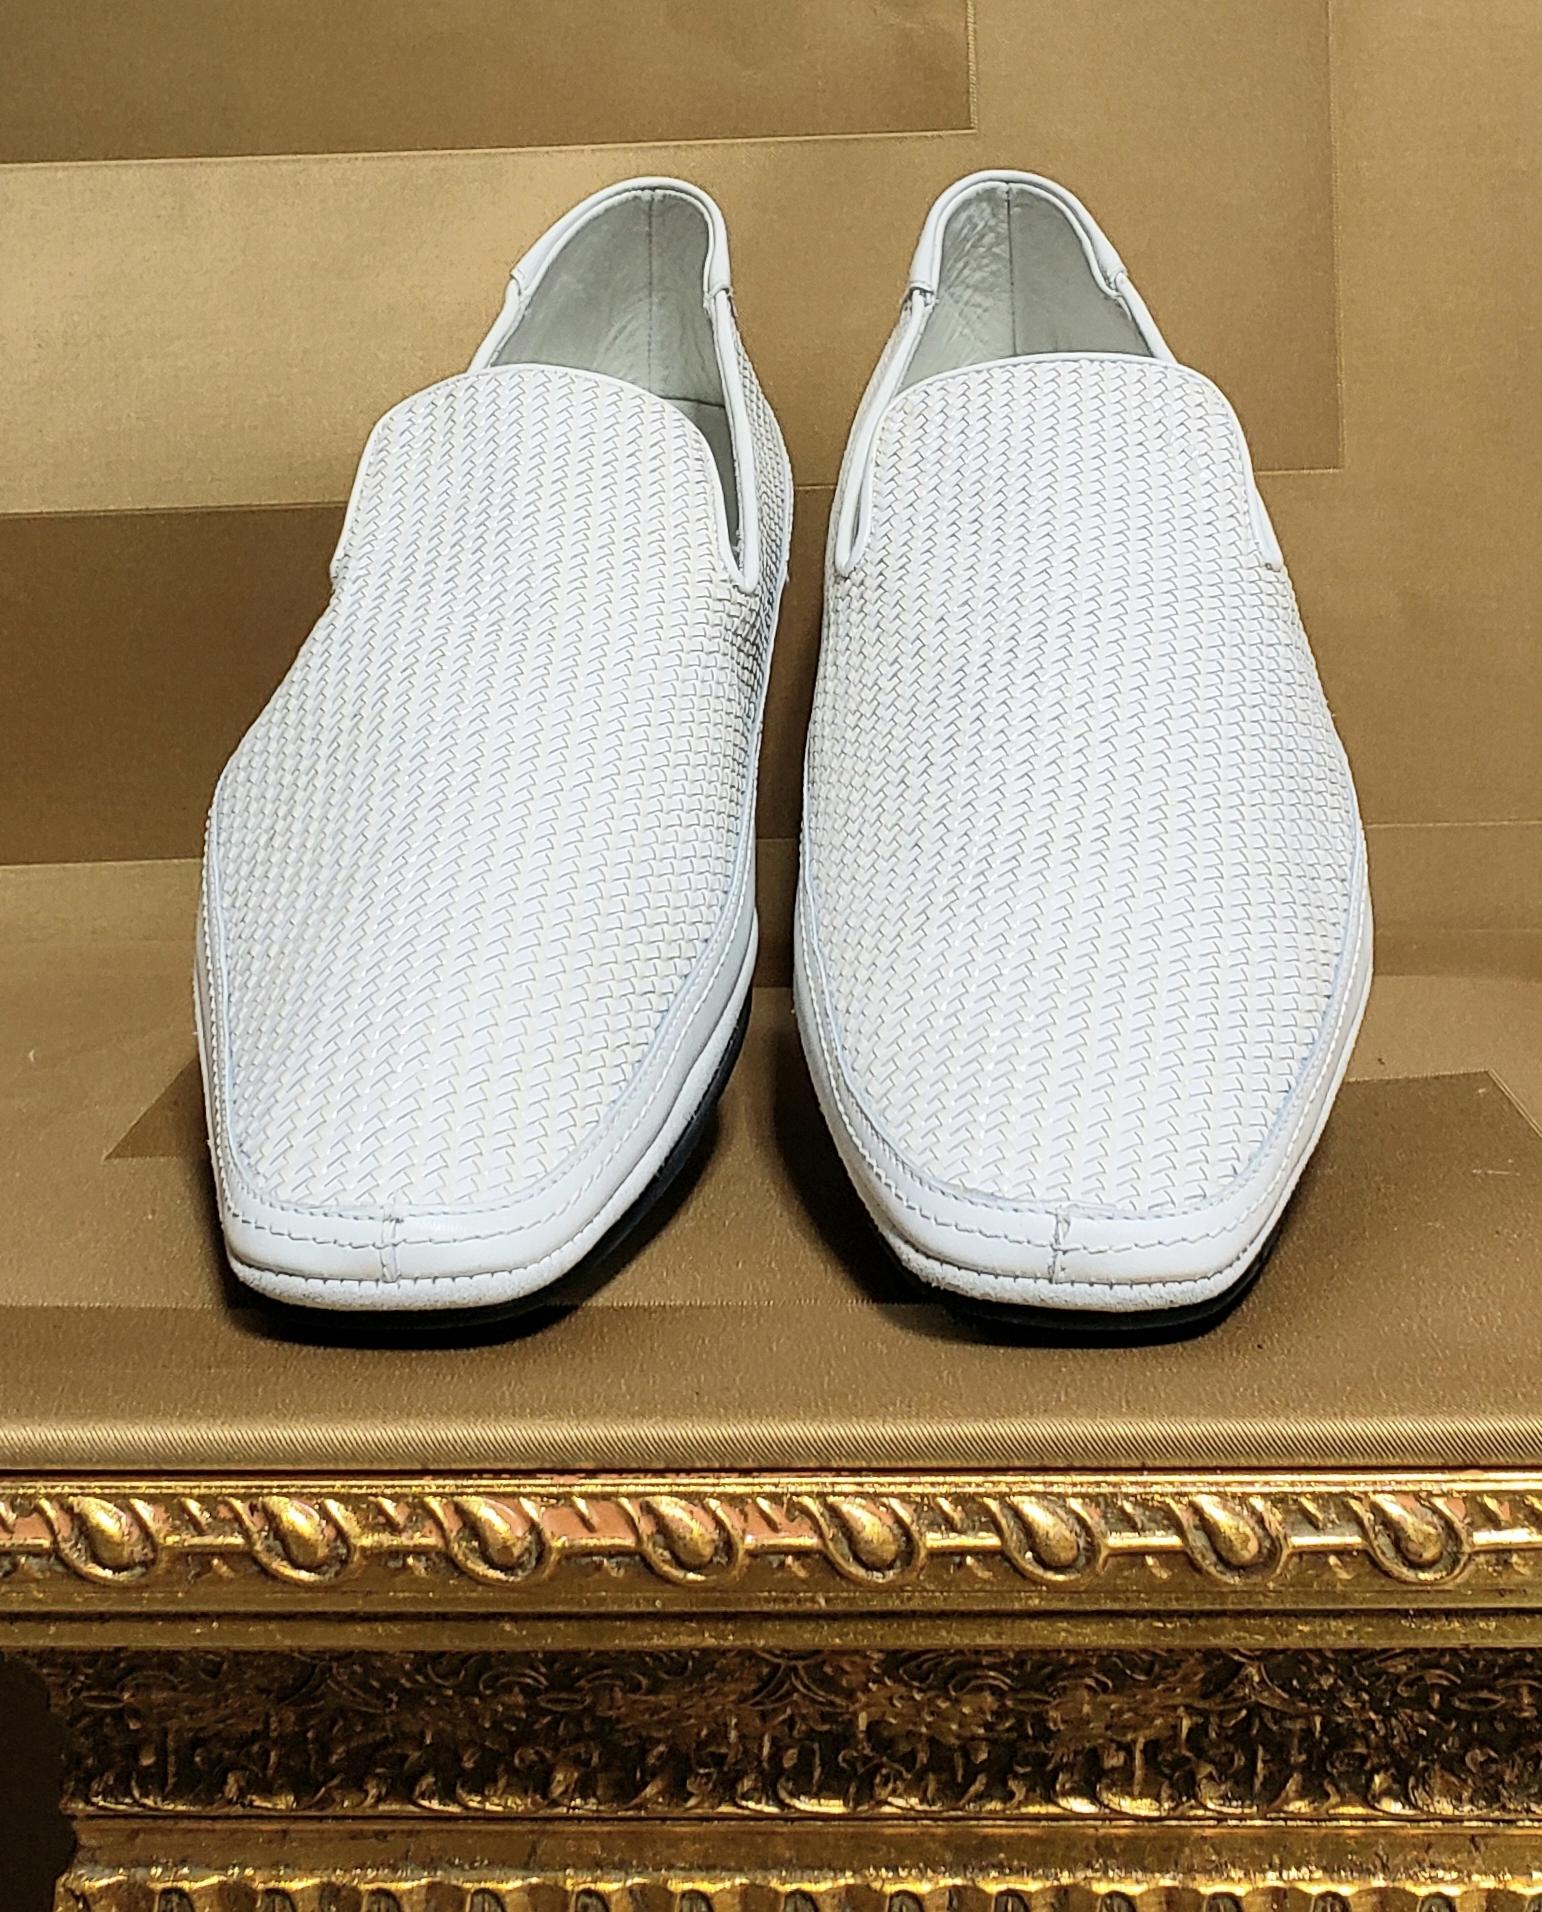 Gray NEW VERSACE WHITE WOVEN LEATHER DRIVER Shoes Sz  44.5 - 11.5, 45 - 12 For Sale